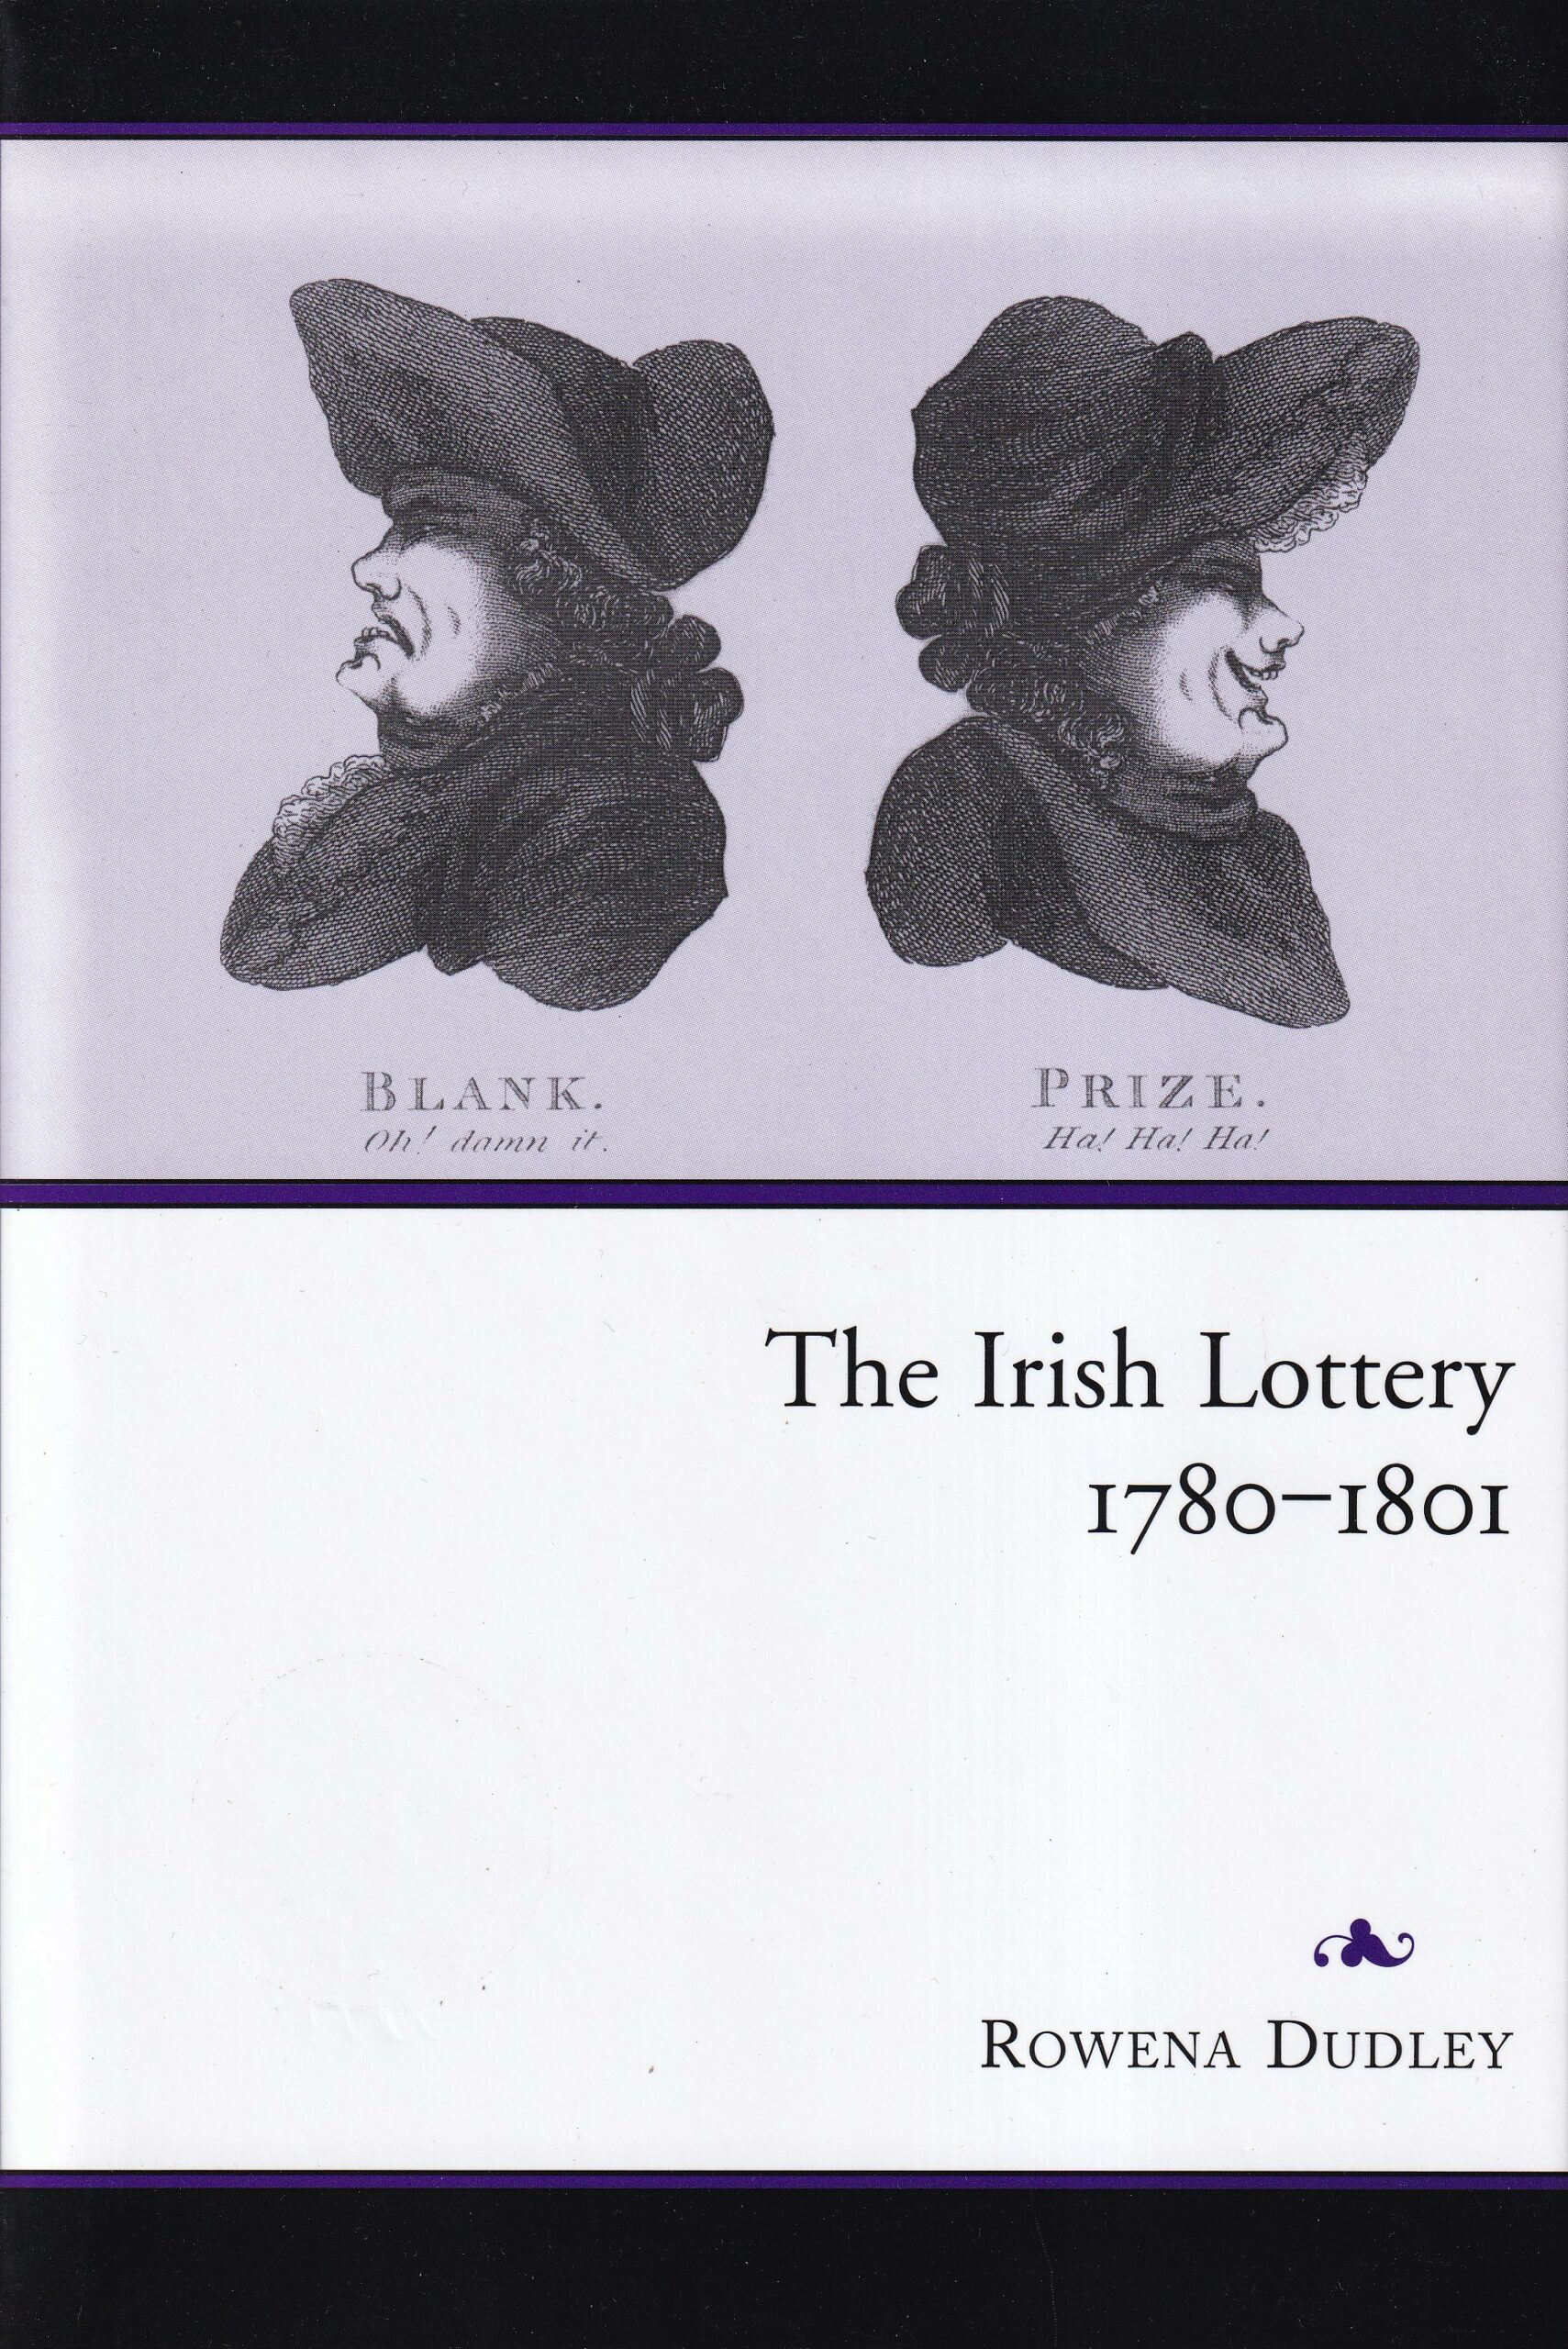 The Irish Lottery 1780-1801 | Rowena Dudley | Charlie Byrne's